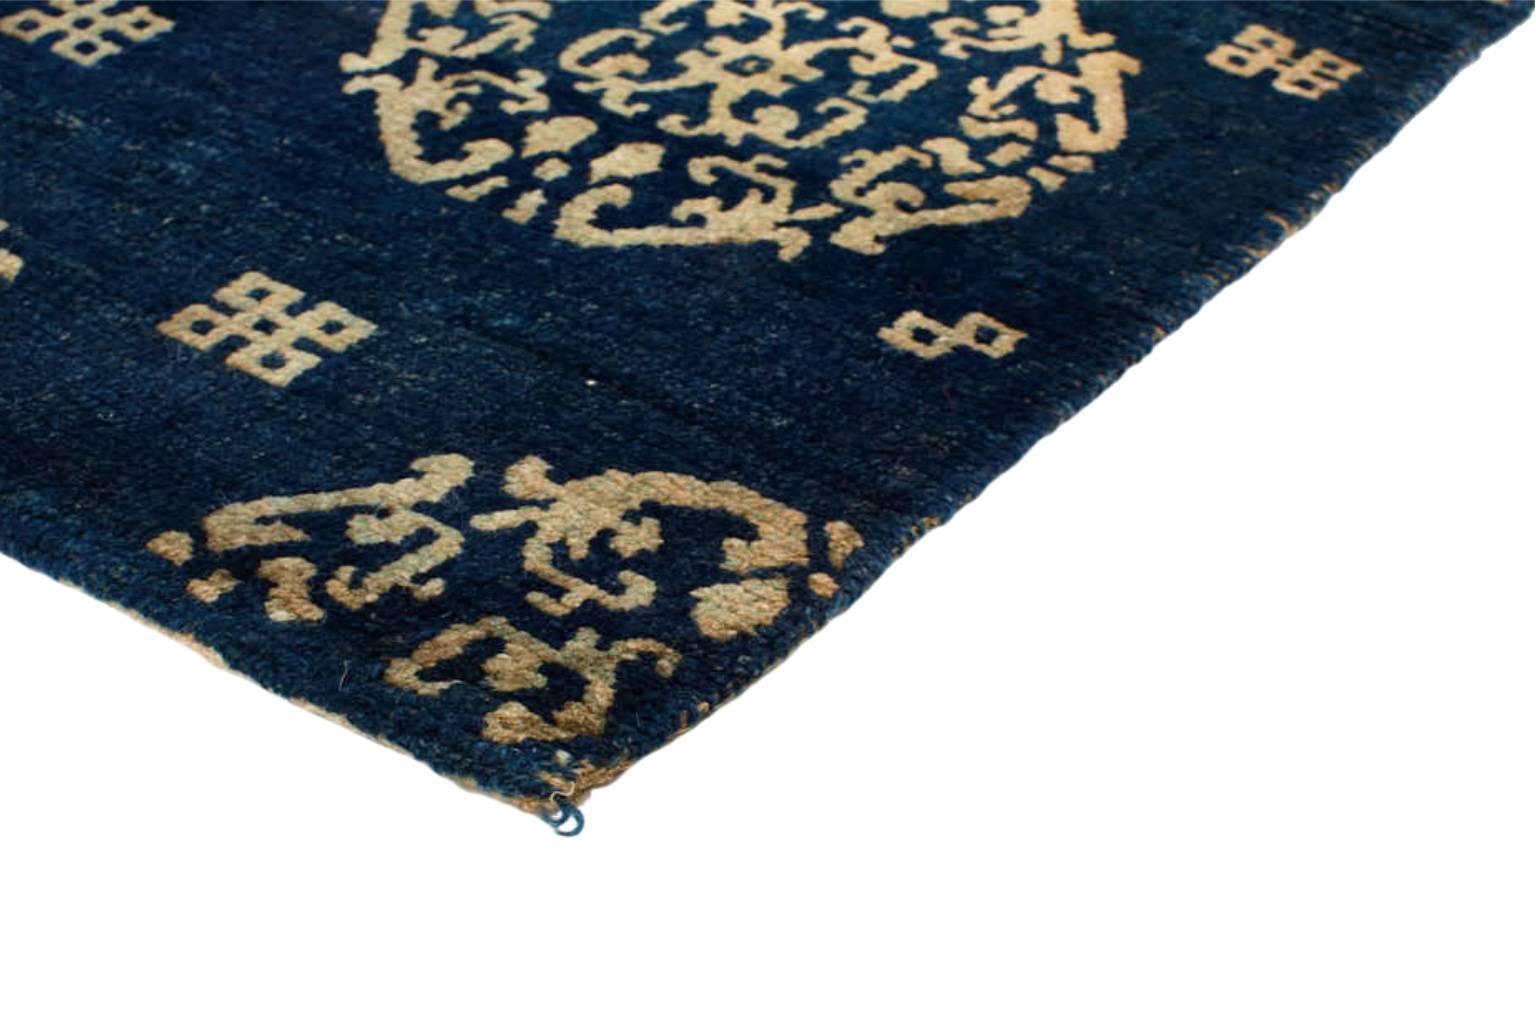 Individually selected by Madeline during her travels, this traditional palette of navy and ivory tonalities highlights the spiritual motifs and design of this antique Tibetan wool rug. The mandala motif represents various cultural beliefs inspired